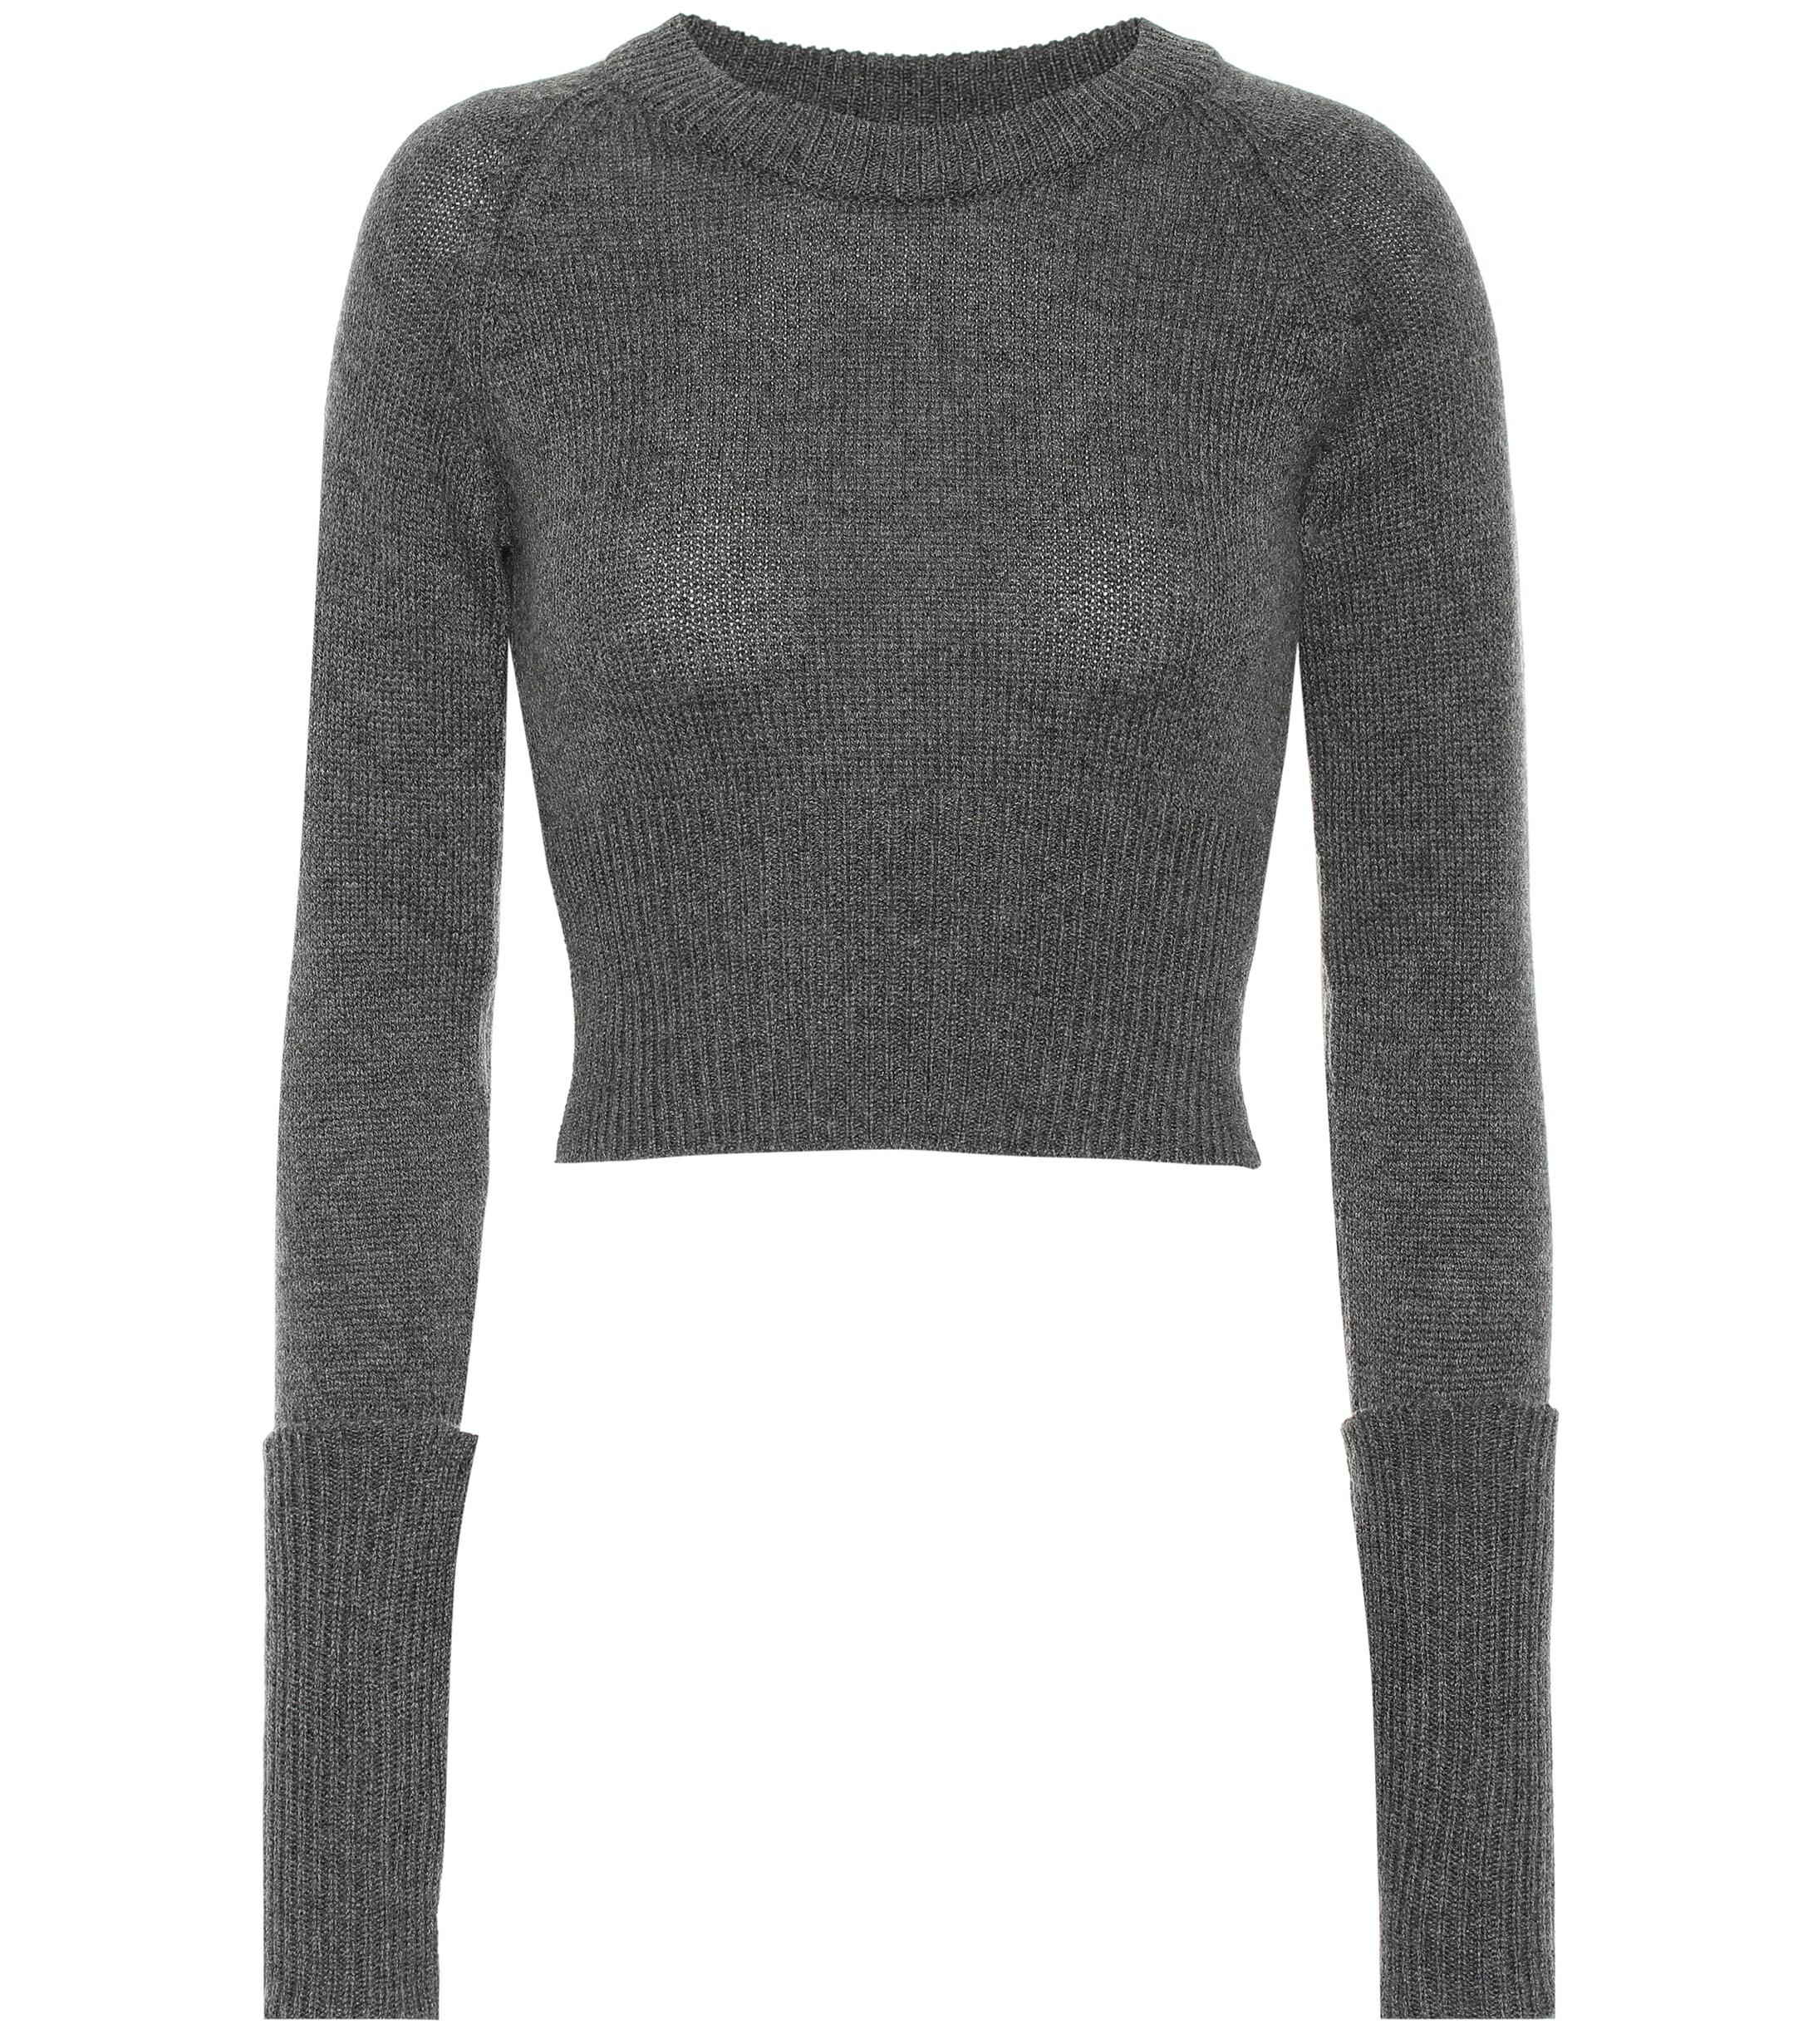 Prada Cropped Cashmere Sweater in Grey (Gray) - Lyst